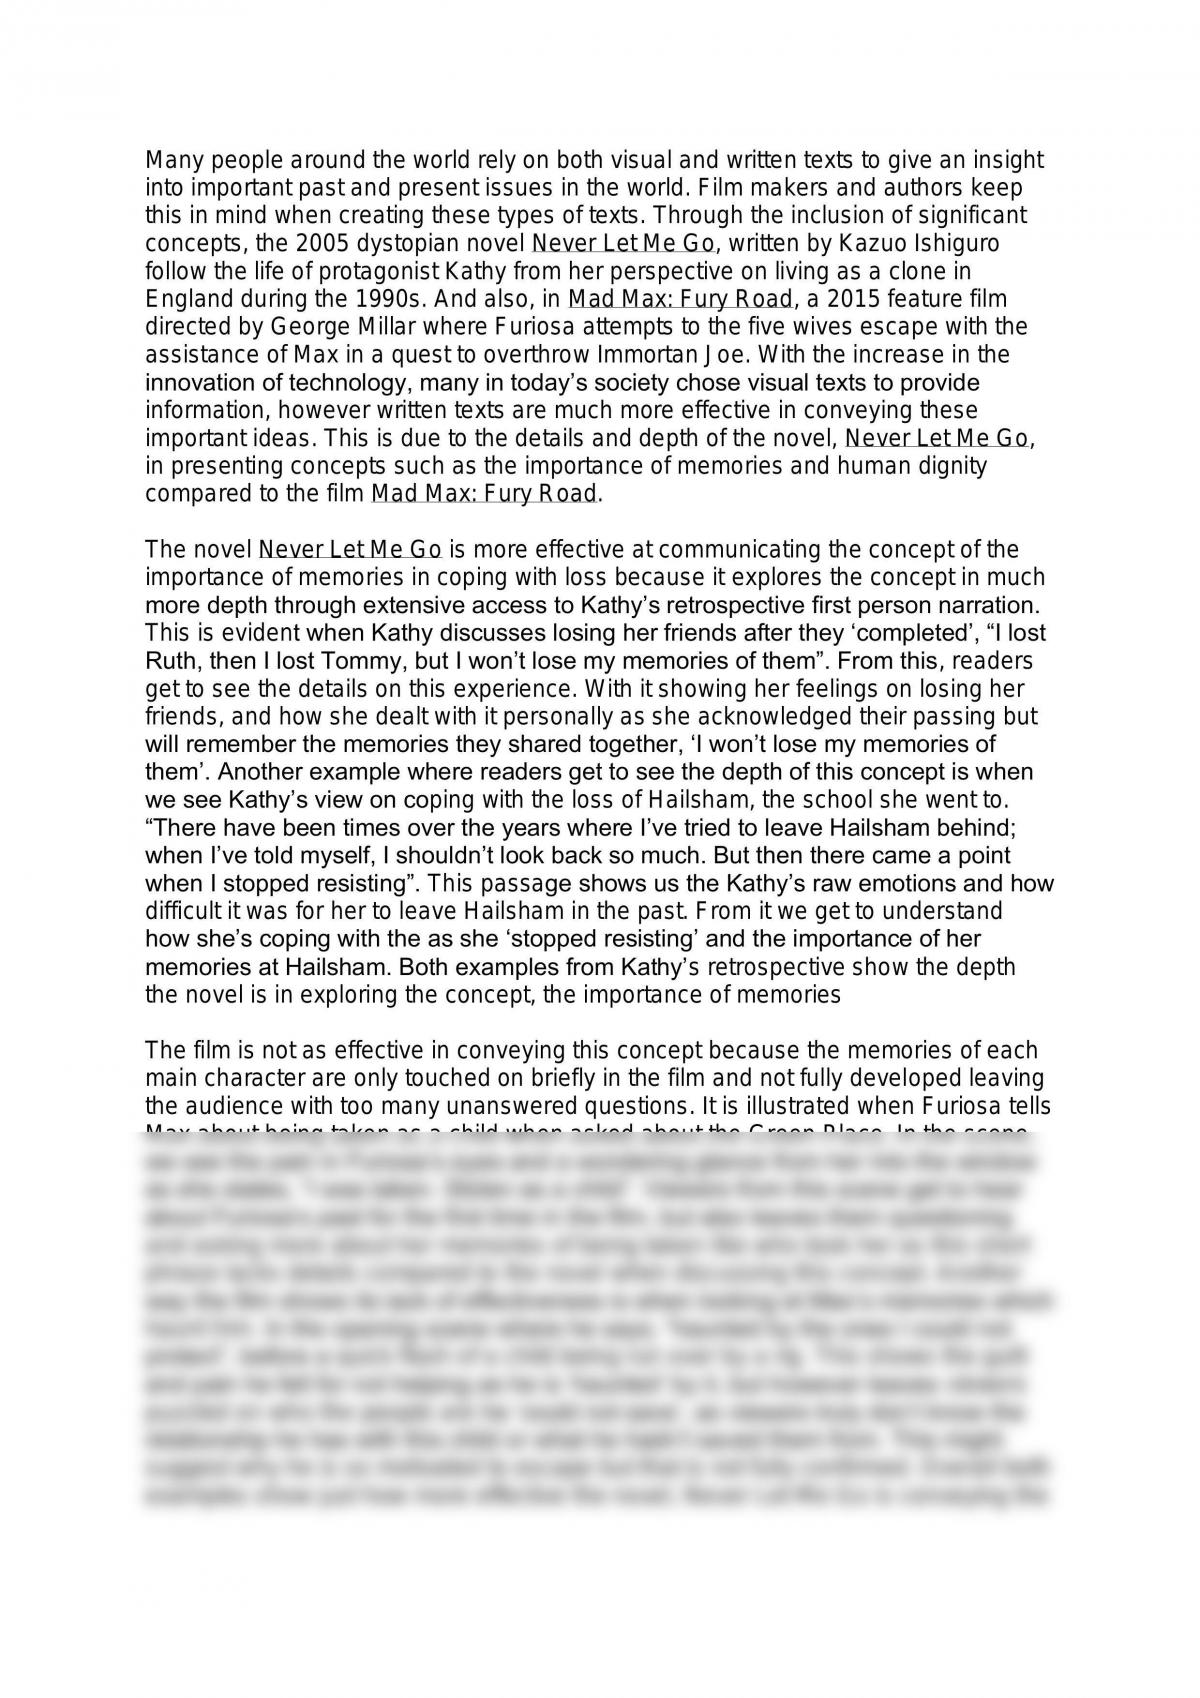 Comparison Essay with Mad Max Fury Road and Never Let Me Go - Page 1